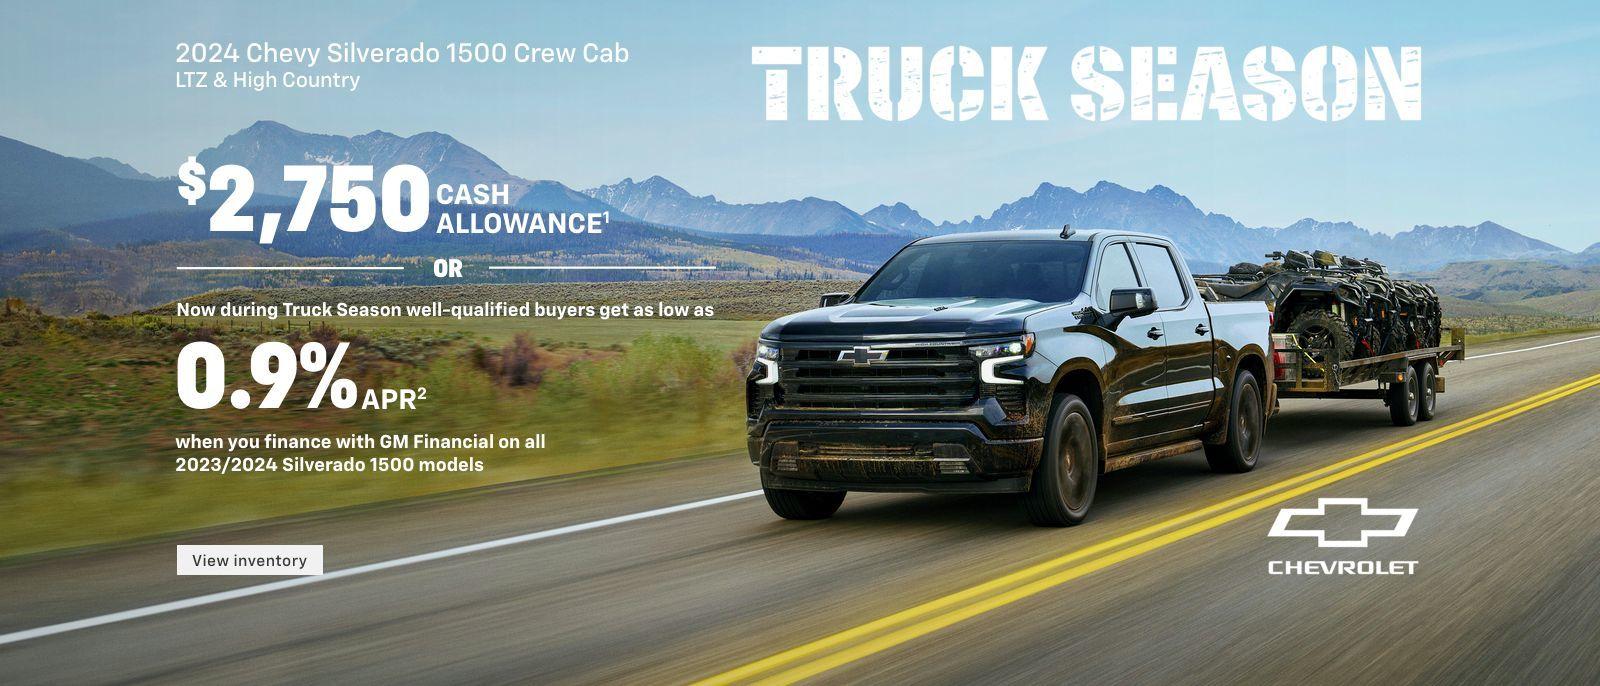 $2,750 cash allowance. Or, now during Truck Season well-qualified buyers get as low as 0.9% APR when you finance with GM Financial on all 2023/2024 Silverado 1500 models.